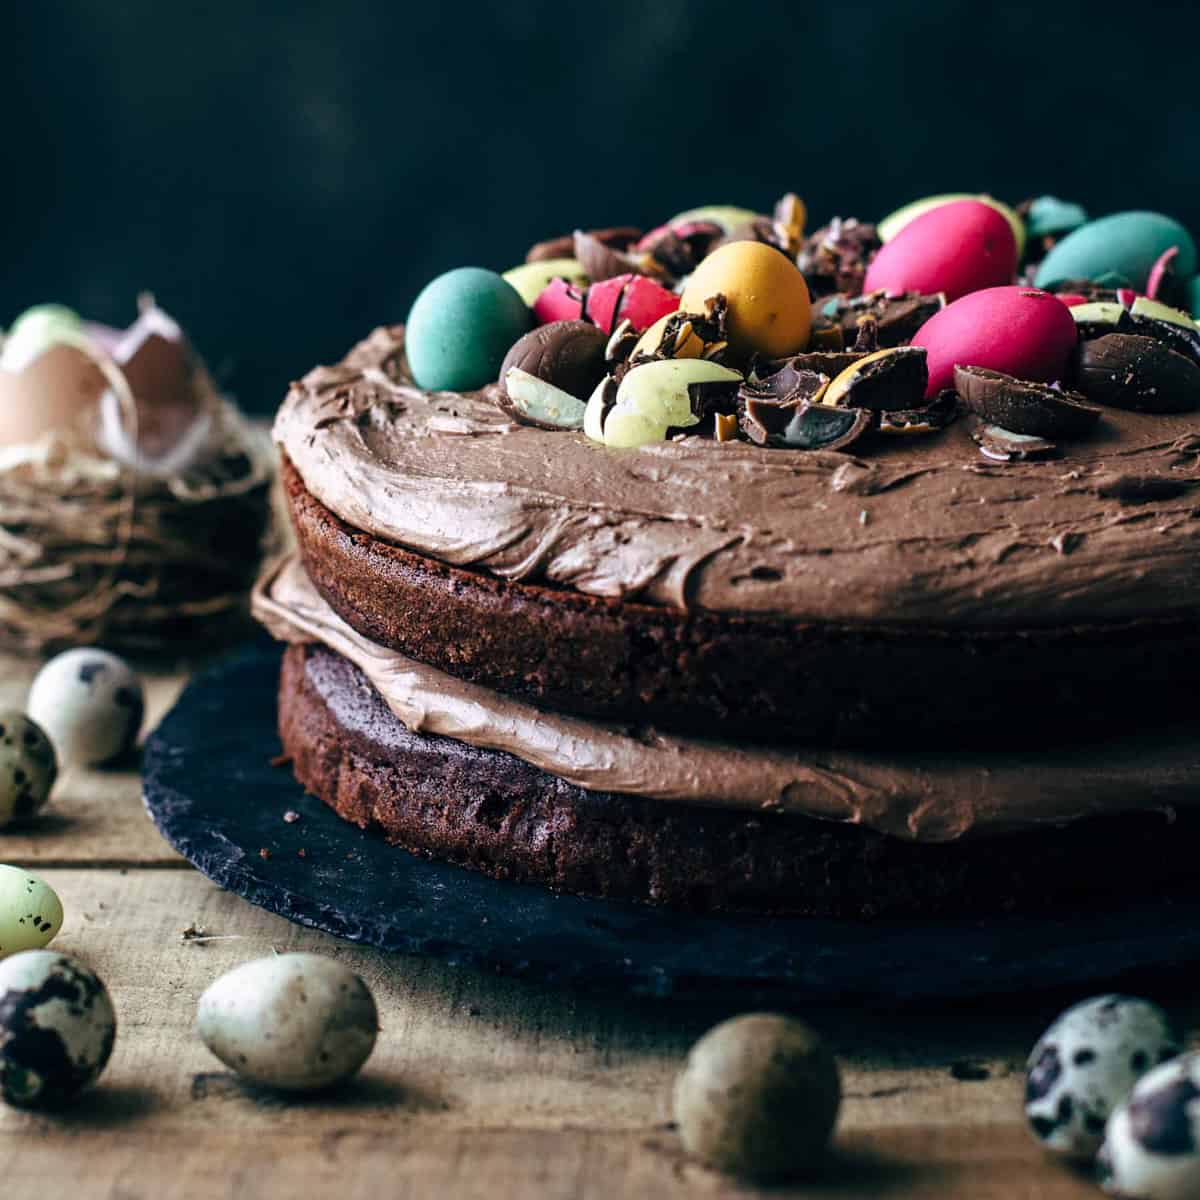 Two-layer chocolate cake with frosting decorated with chocolate eggs